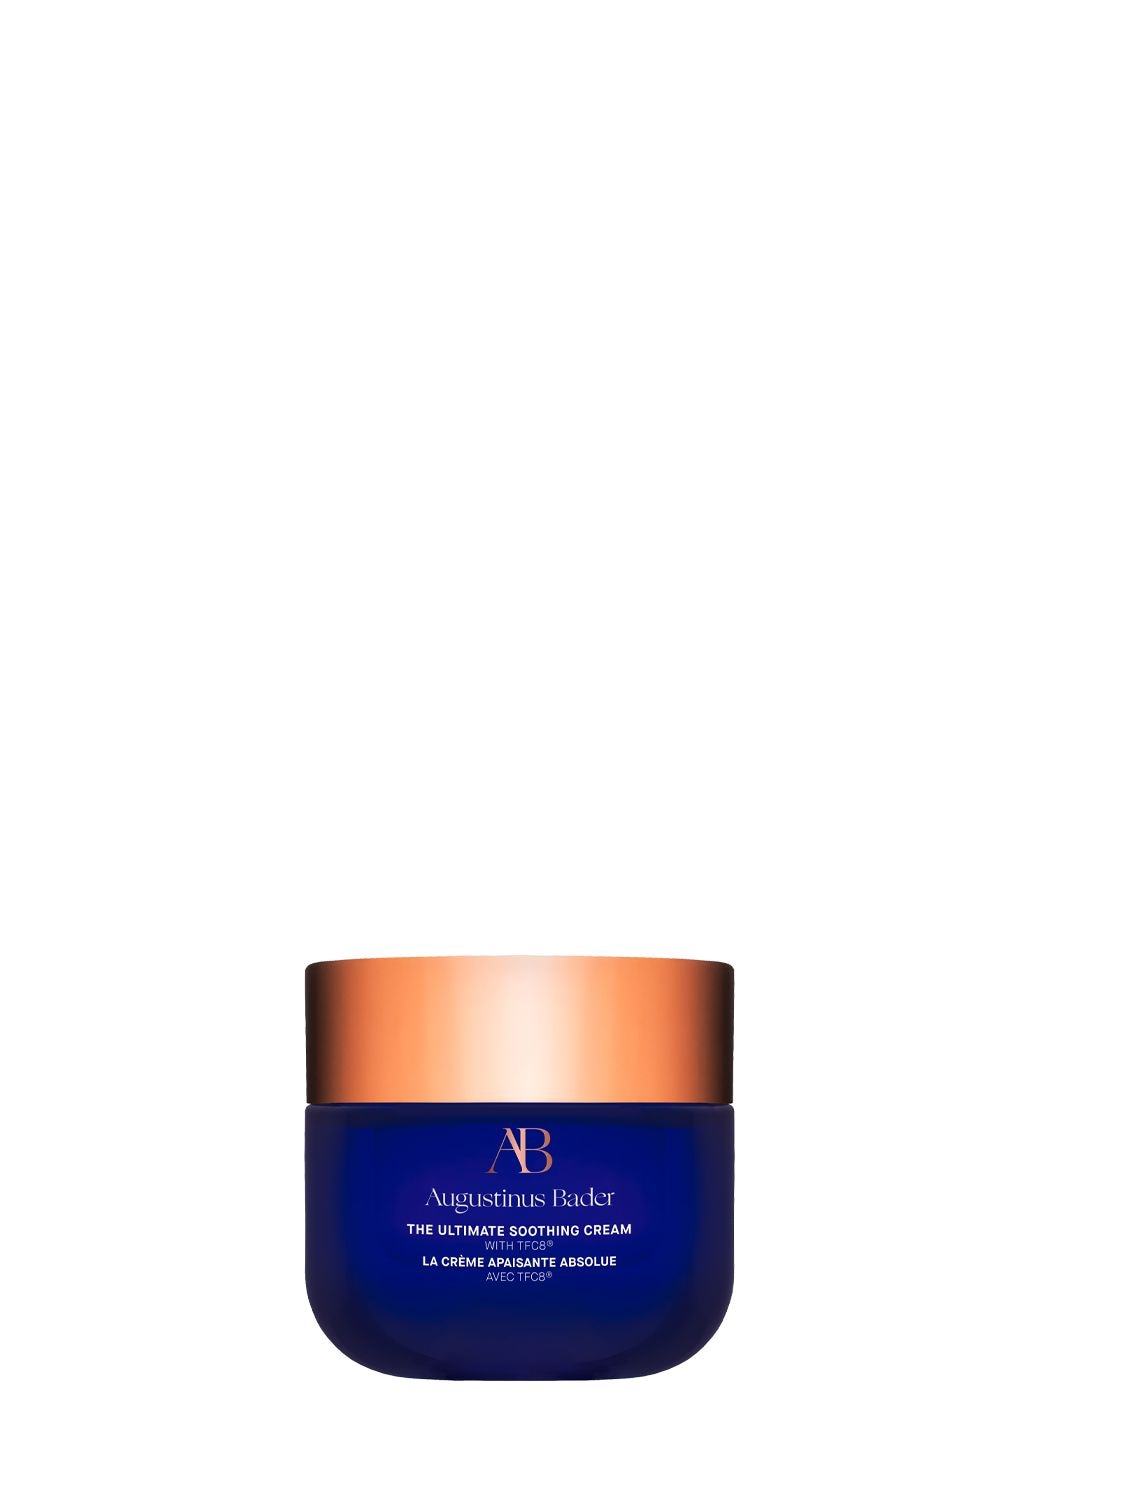 50ml The Ultimate Soothing Cream